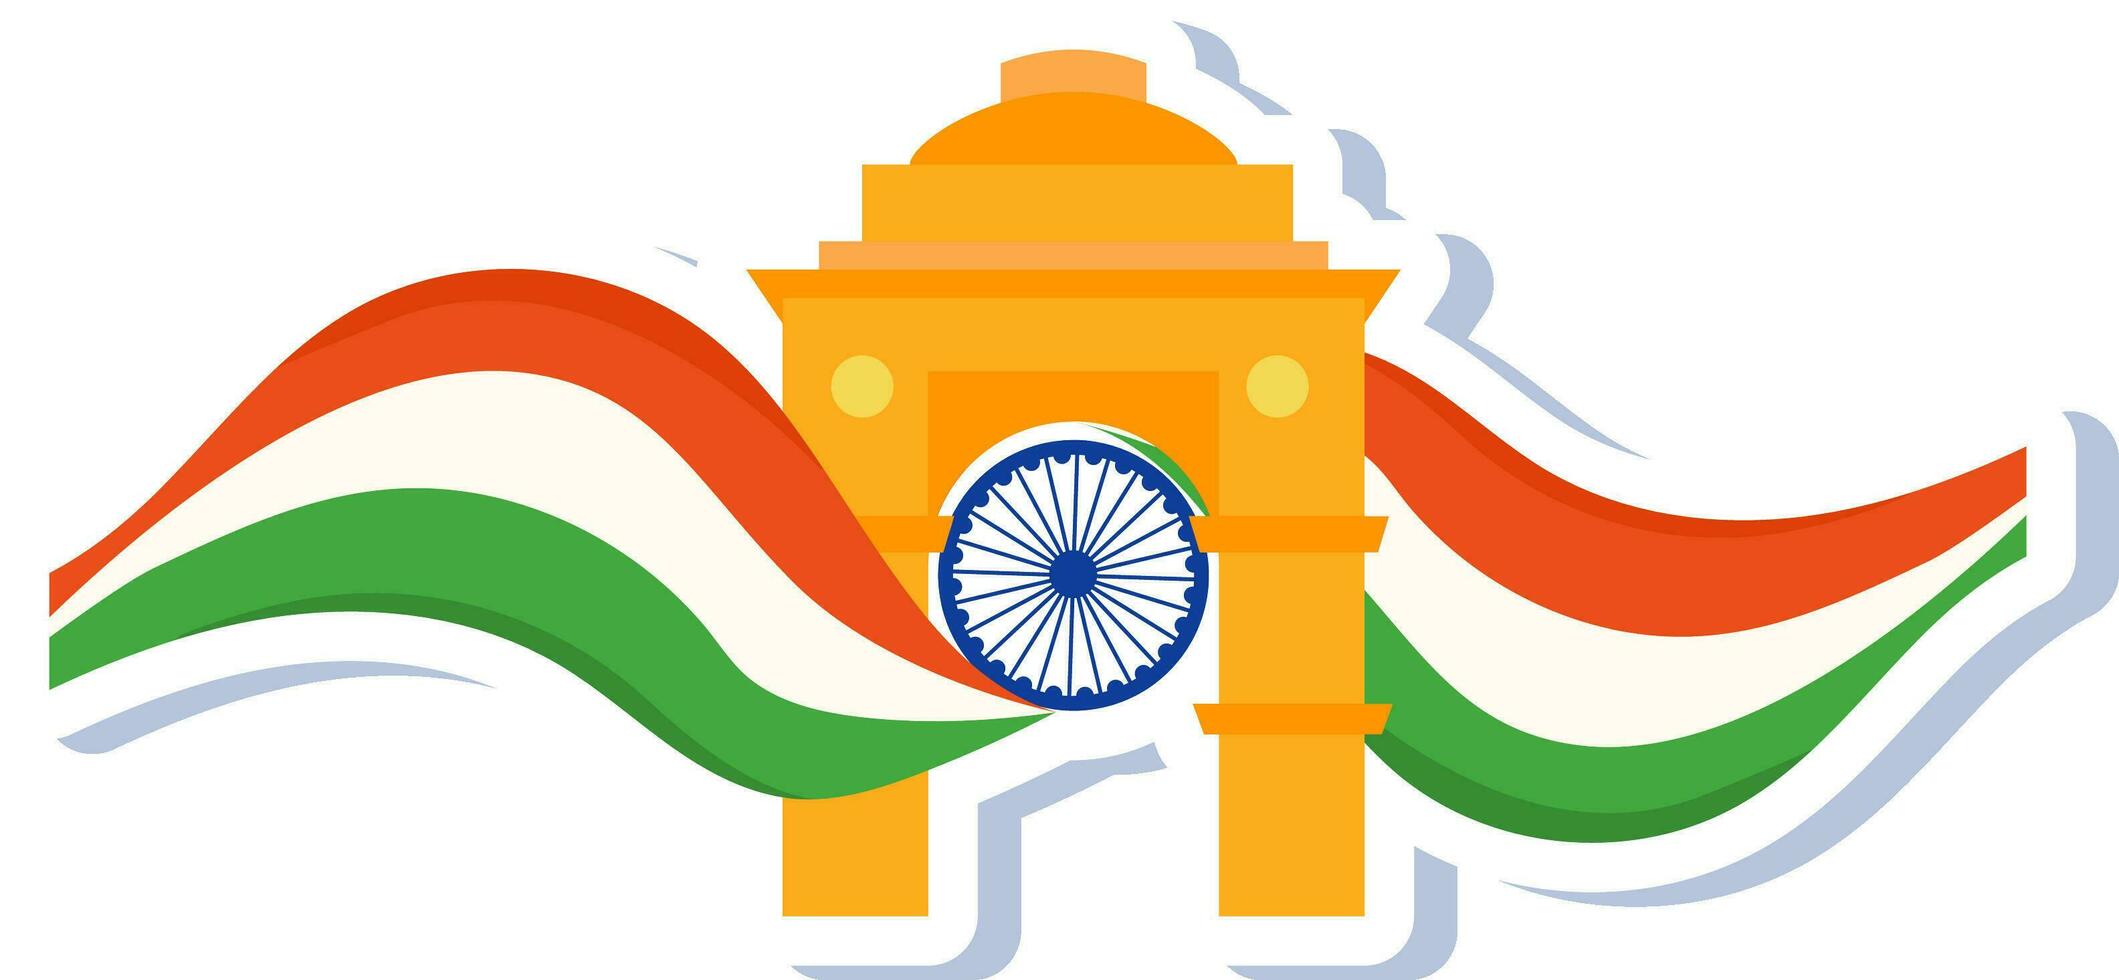 India Gate And Wavy Flag For India National Festival Celebration Concept. vector